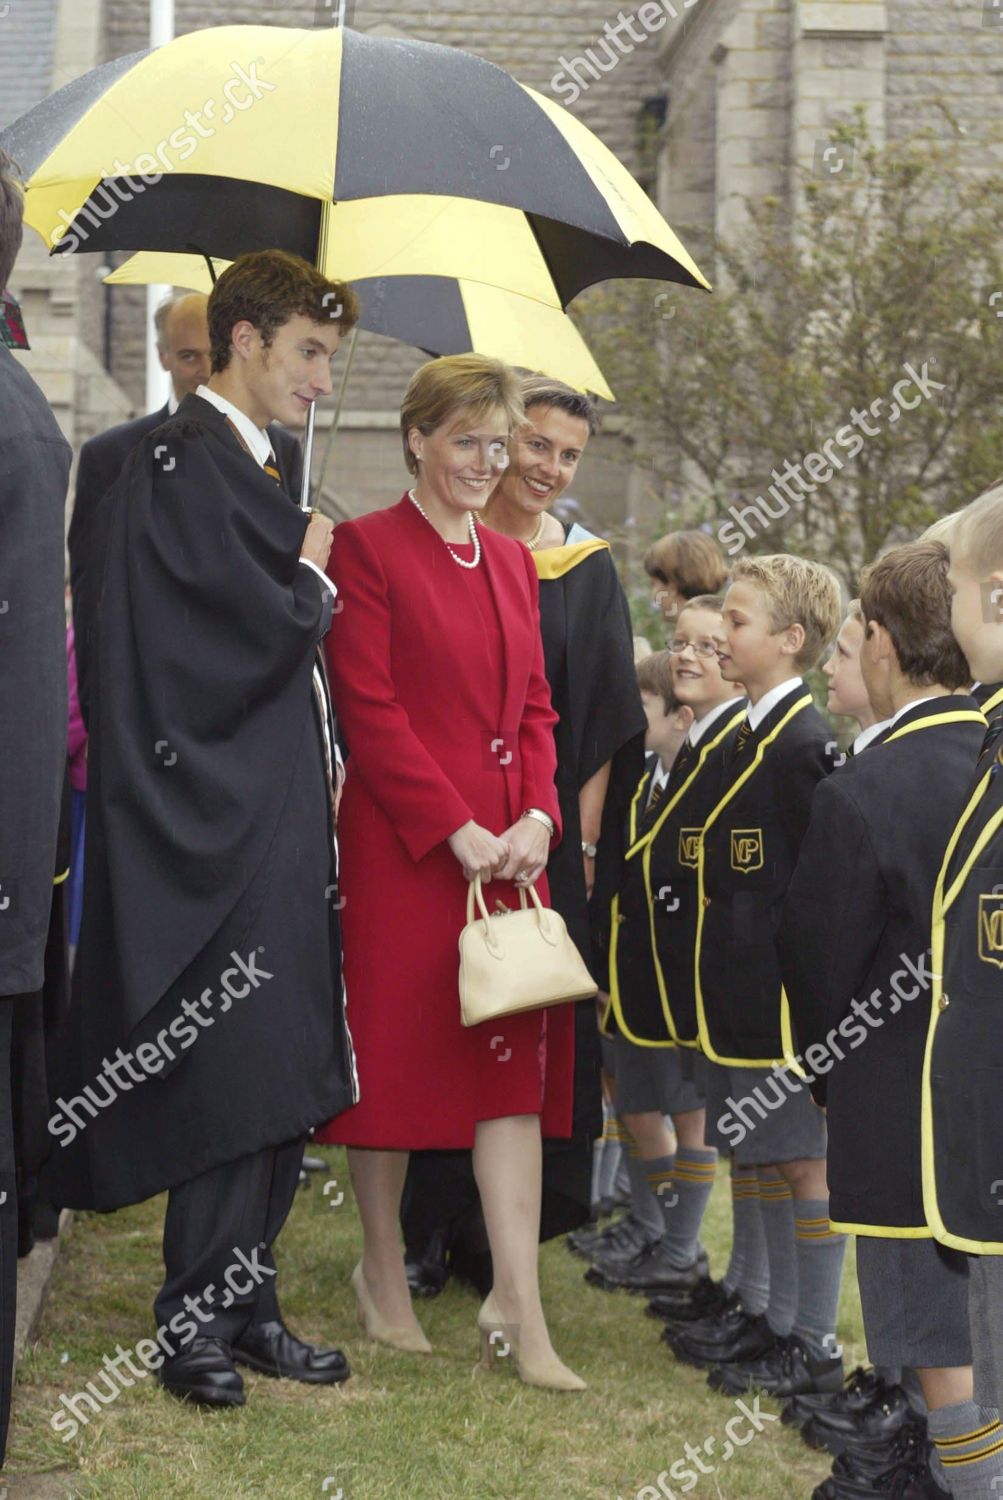 prince-edward-and-sophie-countess-of-wessex-visit-to-victoria-college-st-hellier-jersey-britain-shutterstock-editorial-391060b.jpg